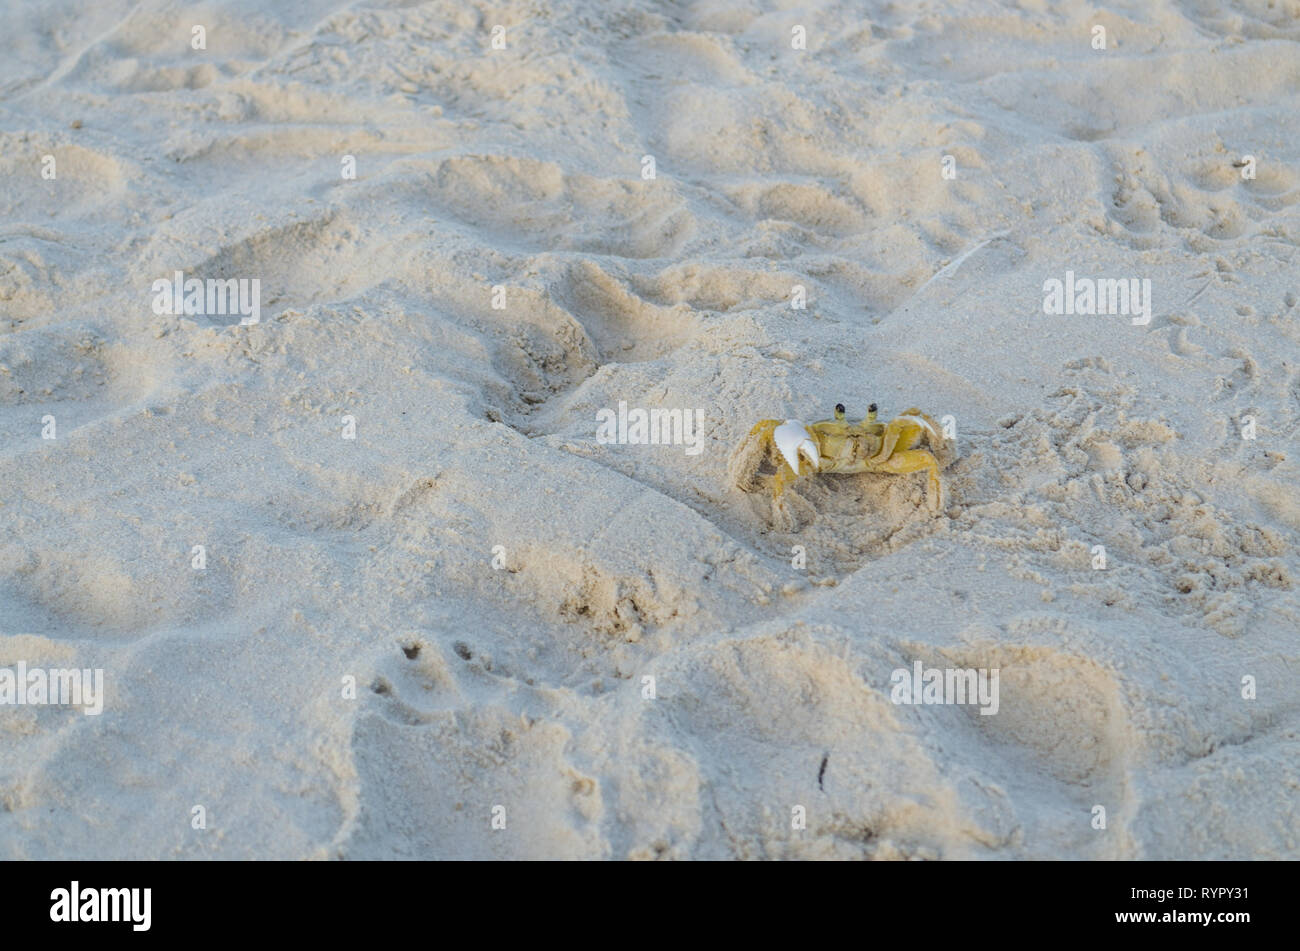 small crab with white claw in the sand on the beach Stock Photo